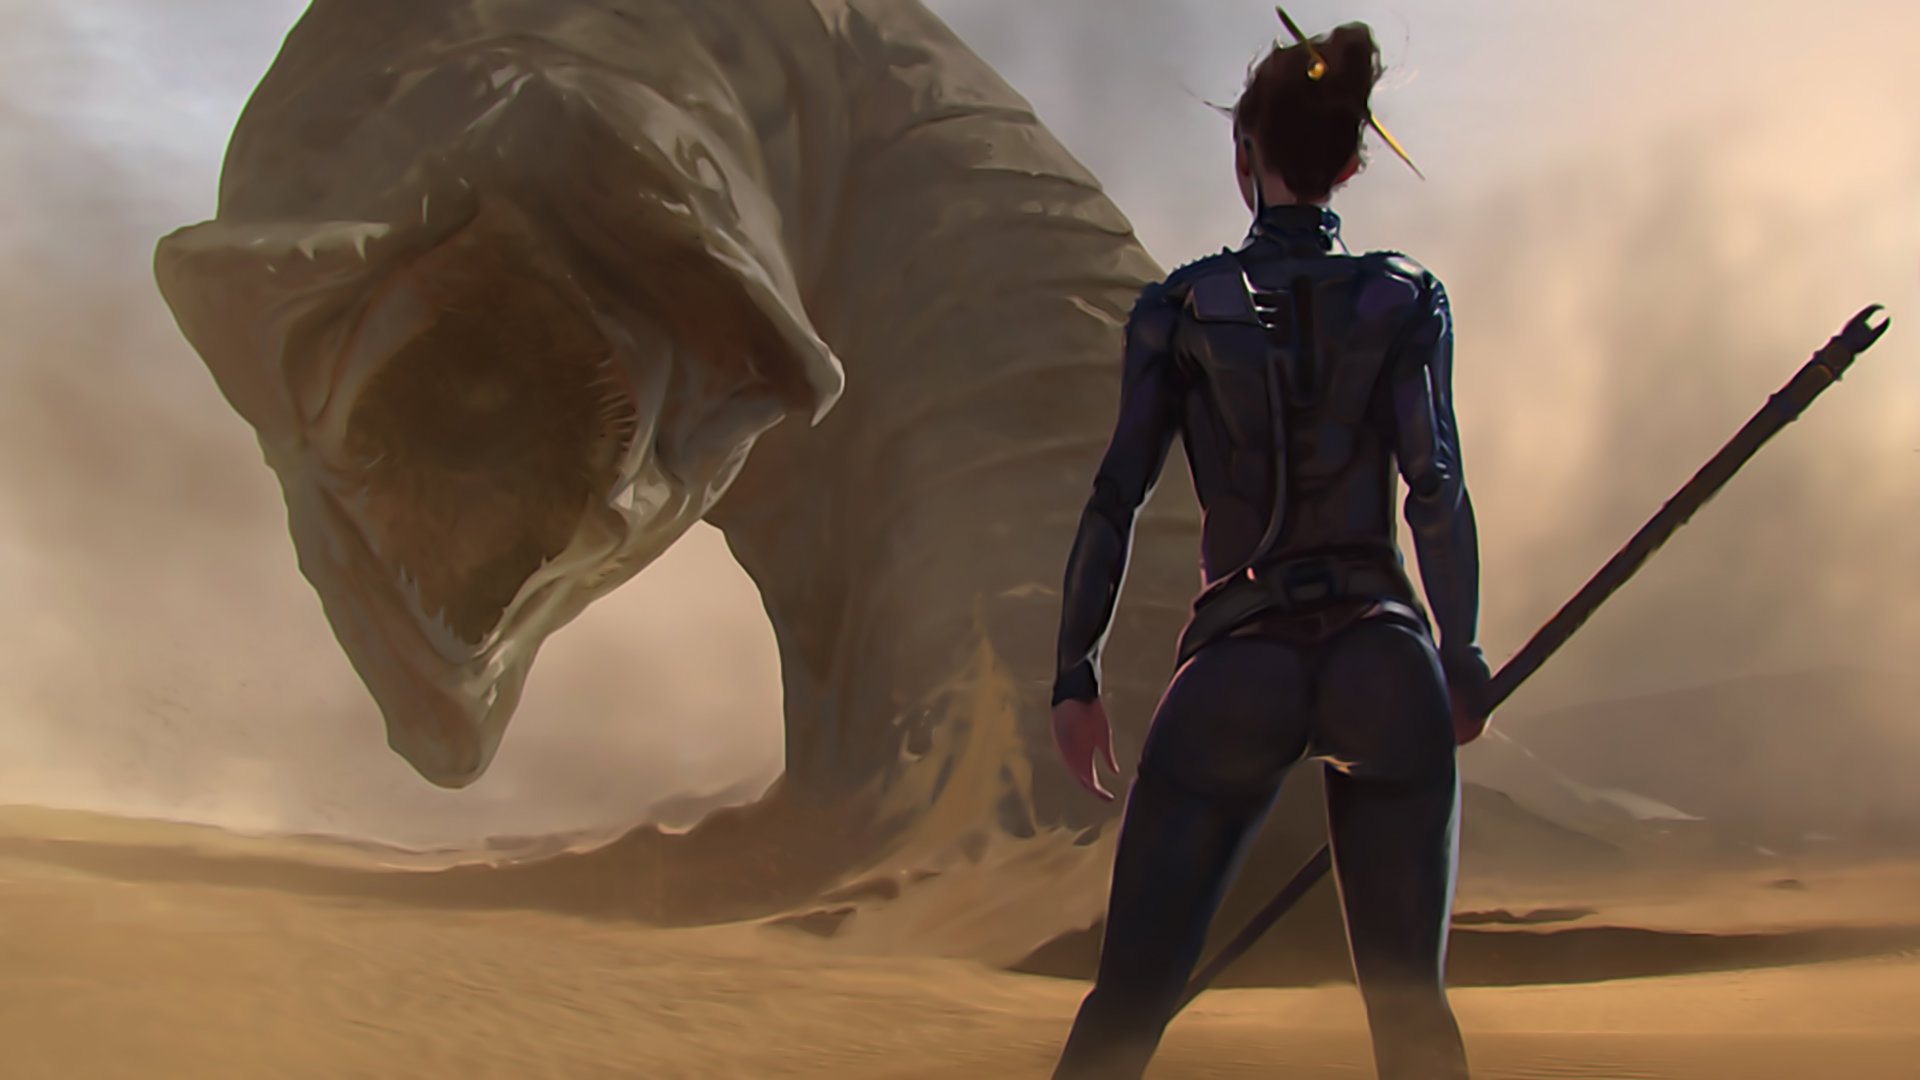 Awesome Dune free wallpaper ID:274873 for hd 1920x1080 computer